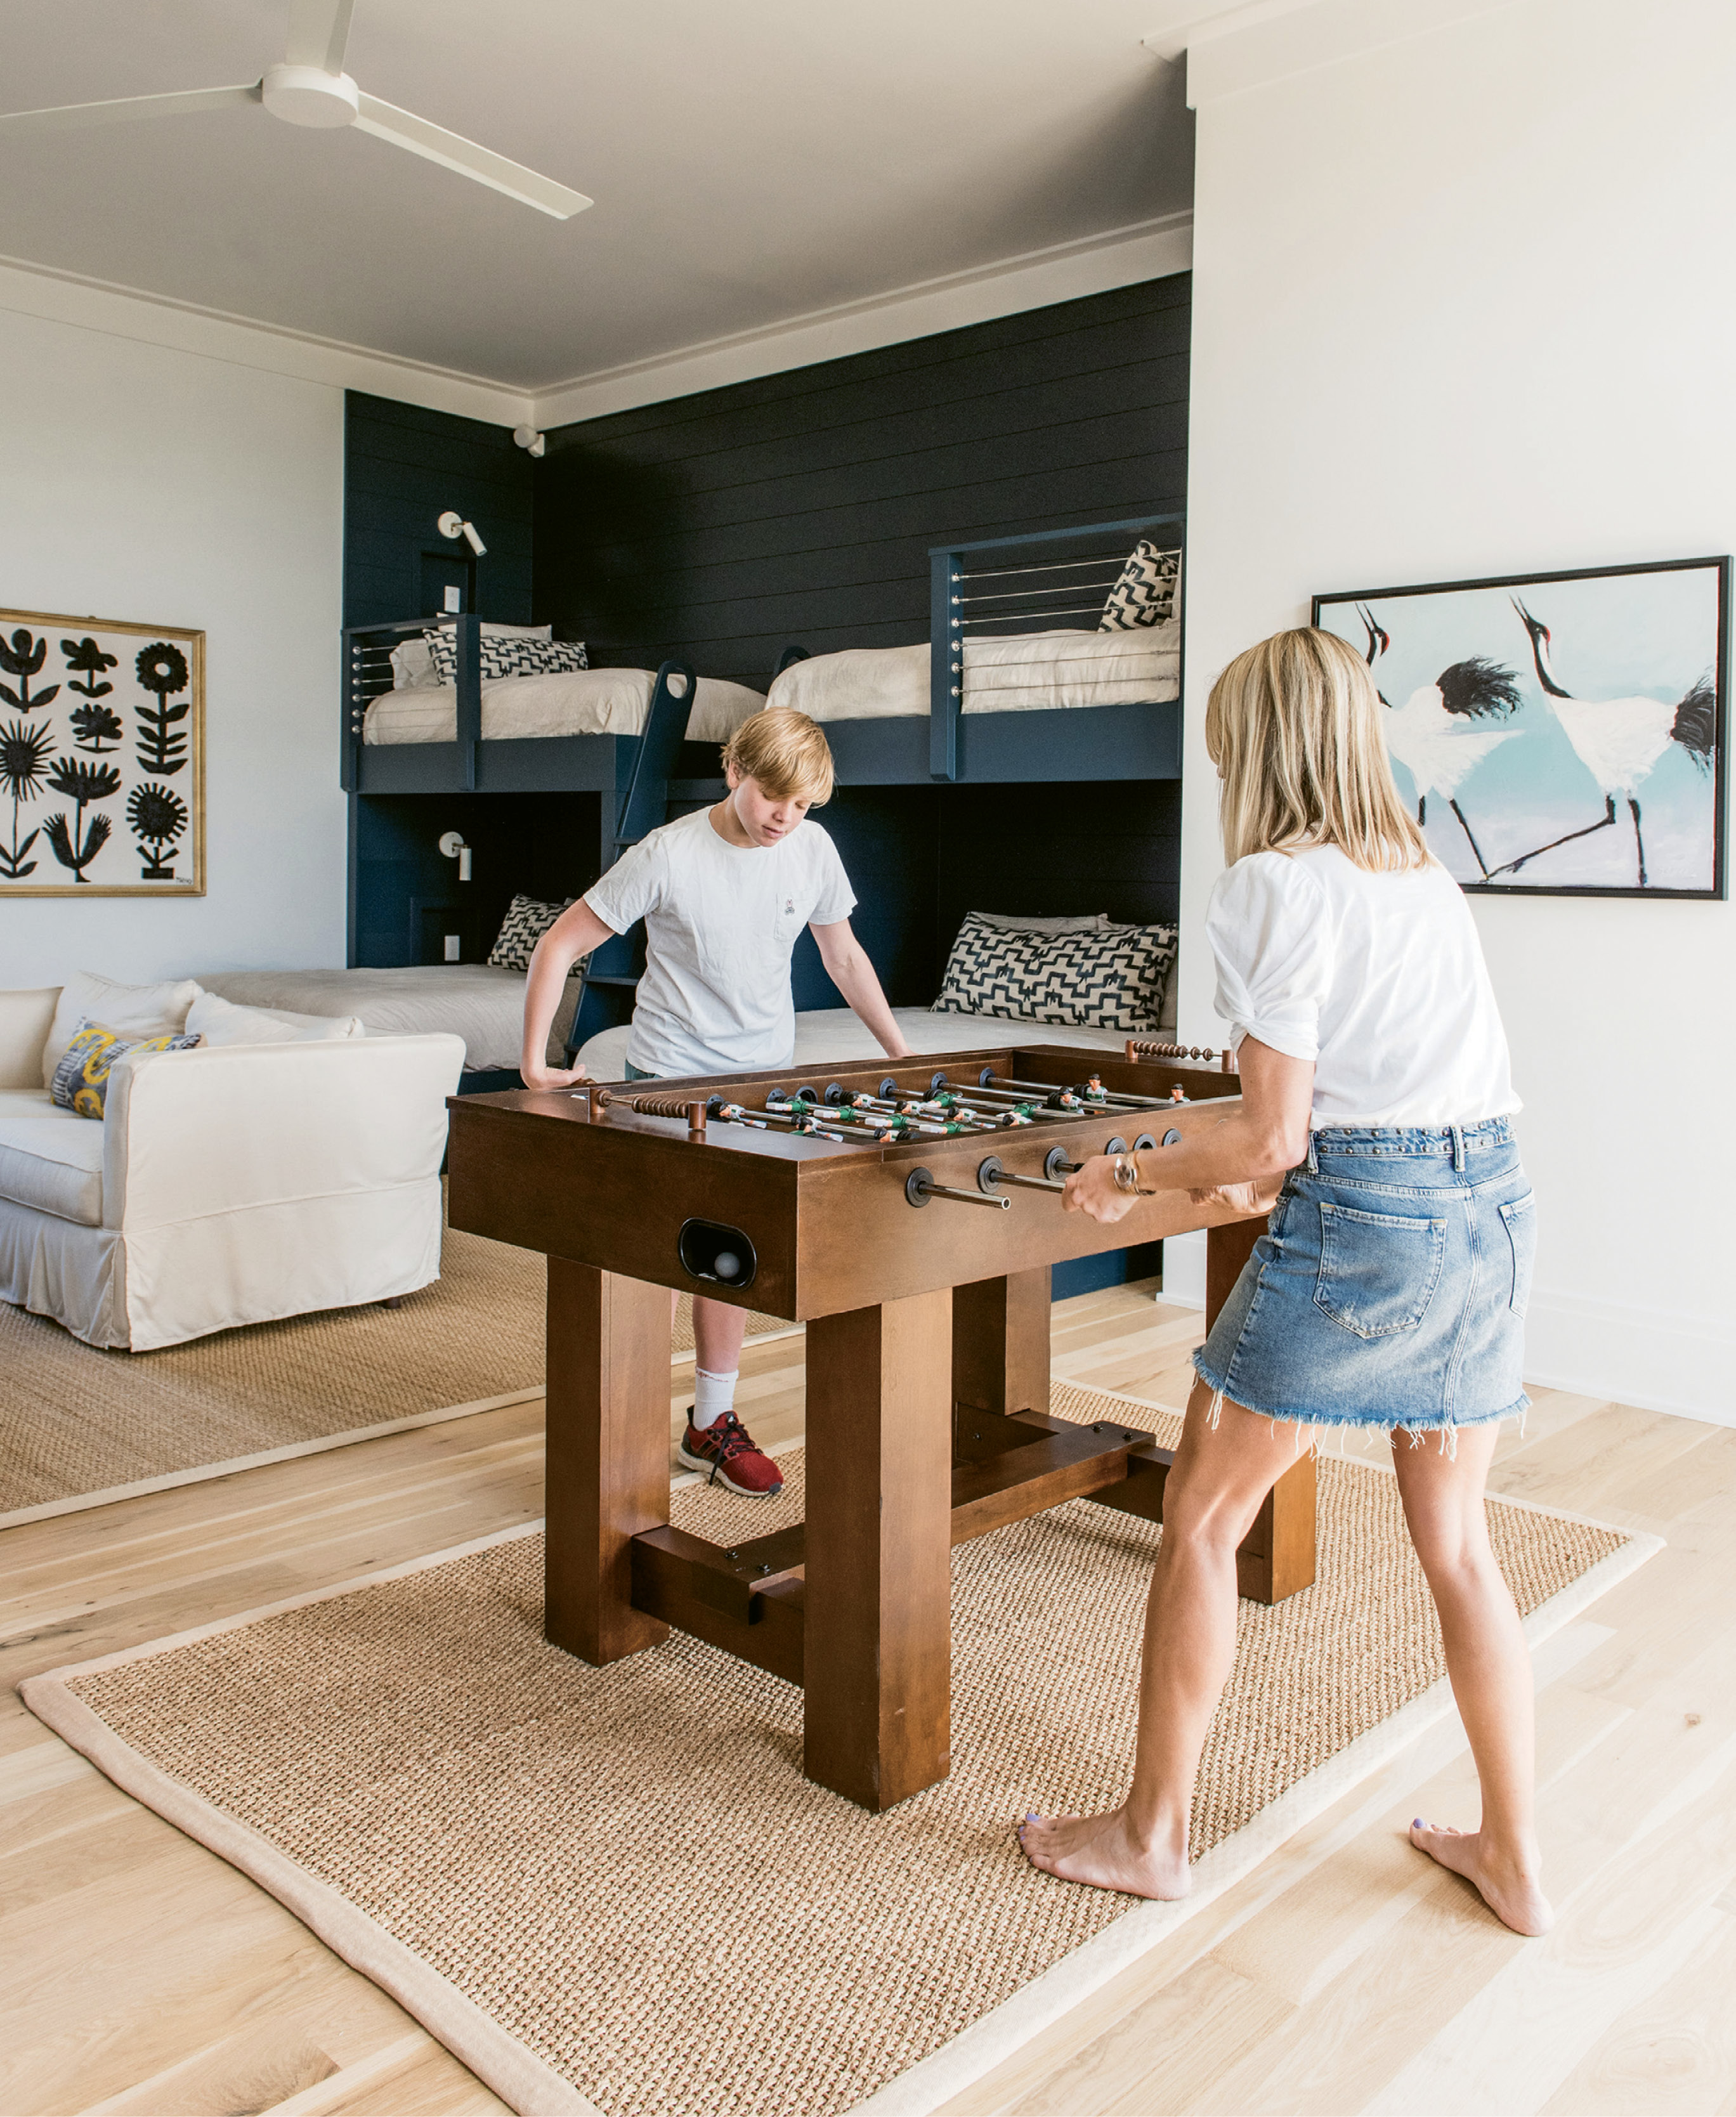 Boasting a foosball table and big-screen TV, the bunk room—which is situated between the children’s rooms on the top floor—is a dream for sleepovers. Even so, its full bath, balcony access, and quartet of comfy beds make it equally inviting to visiting adults.